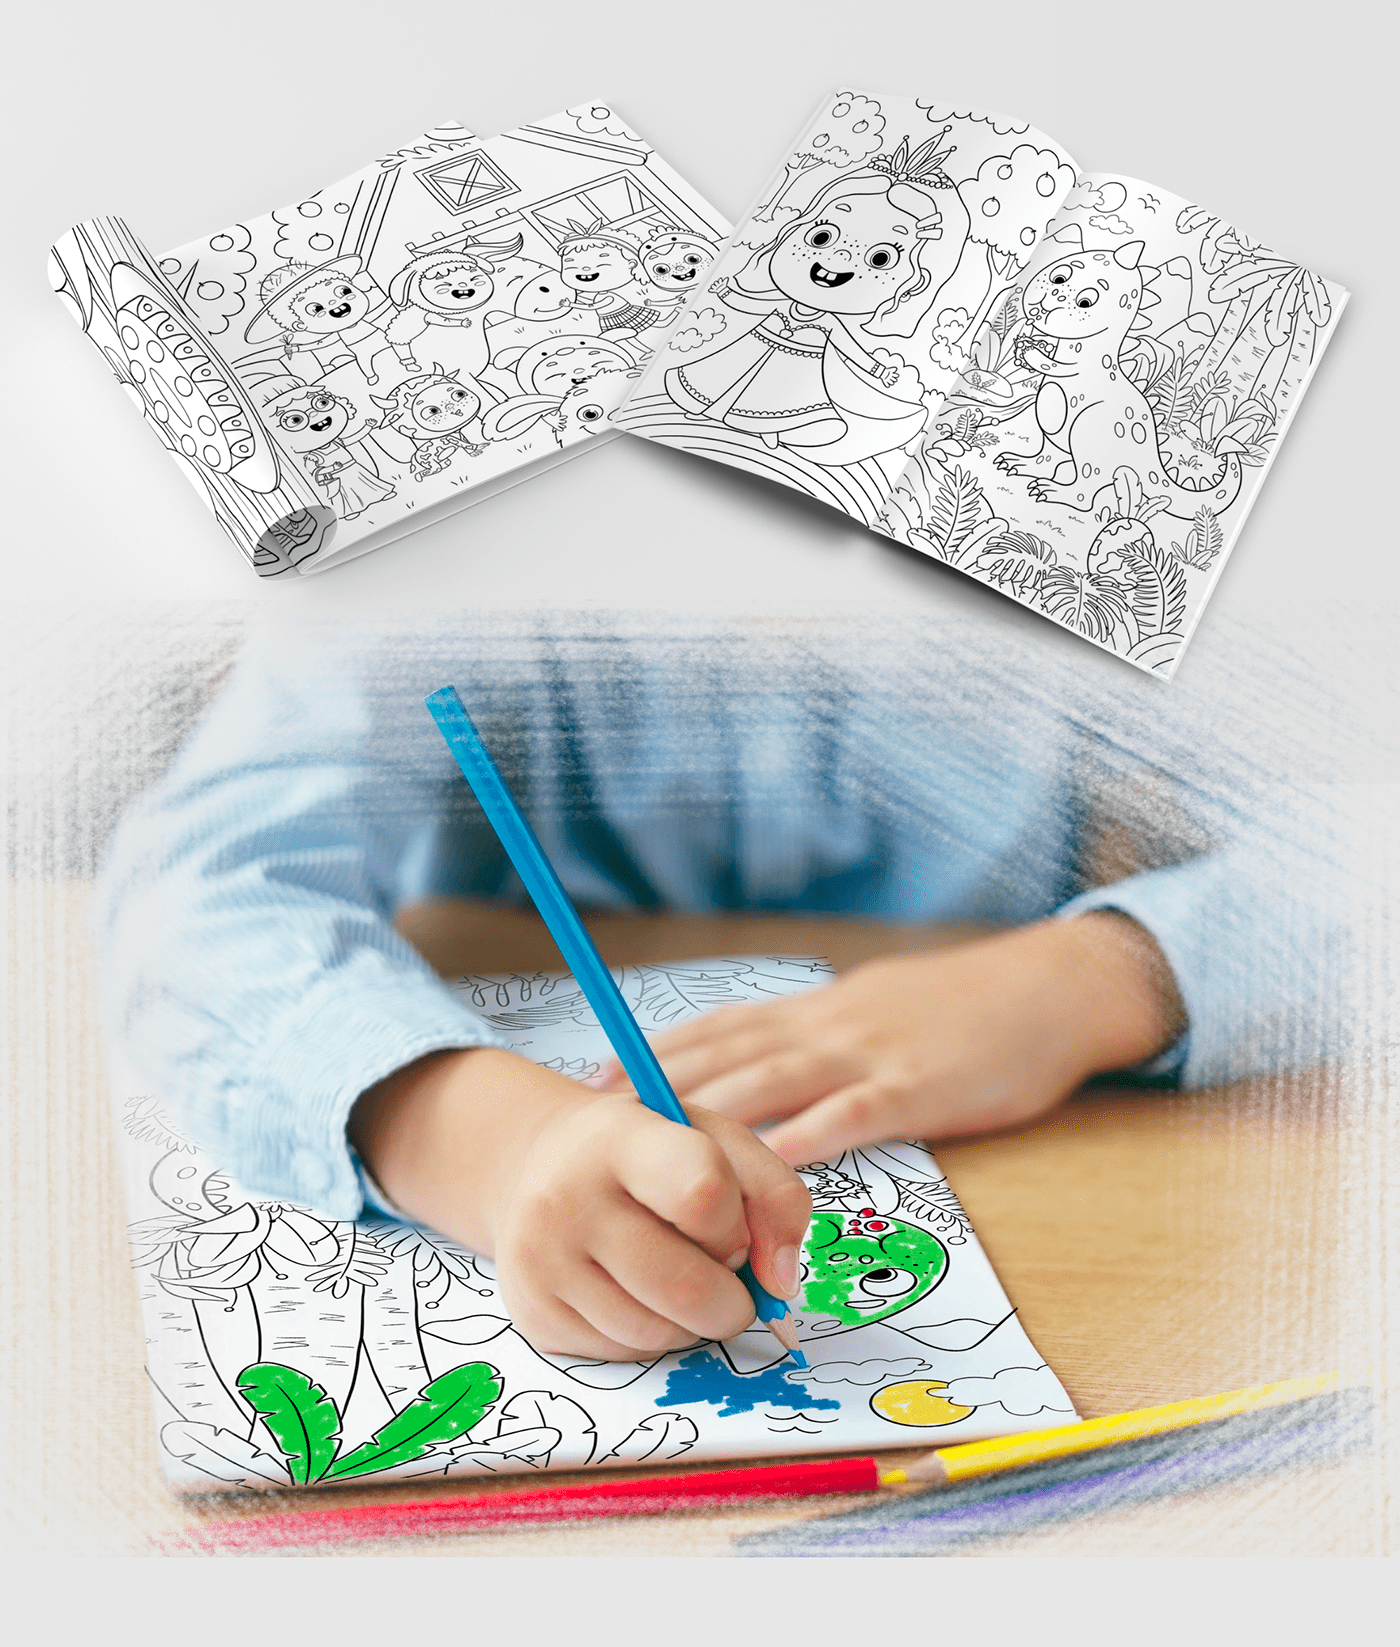 coloring book children's book coloring book cover For Kids children illustration cartoon animal Coloring Pages line art